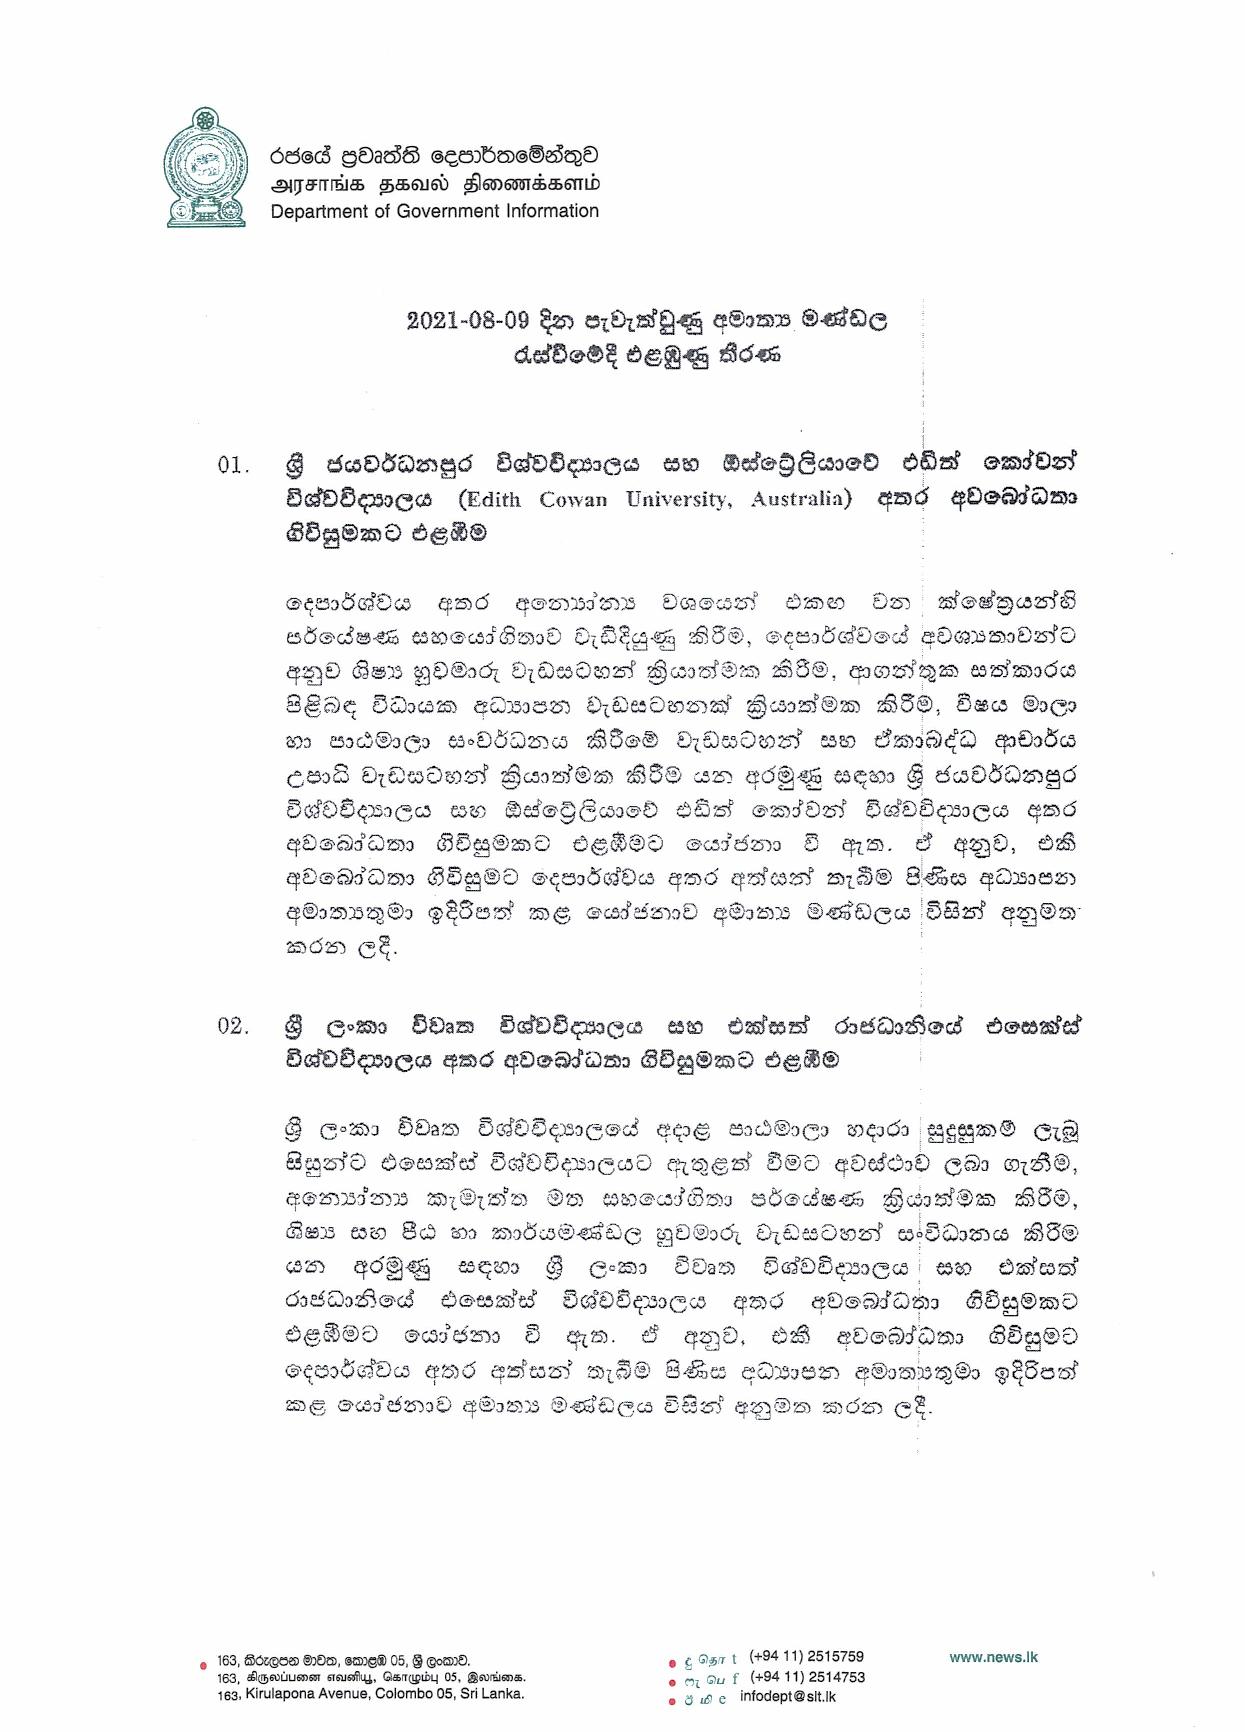 Cabinet Decision on 09.08.2021 Sinhala page 001